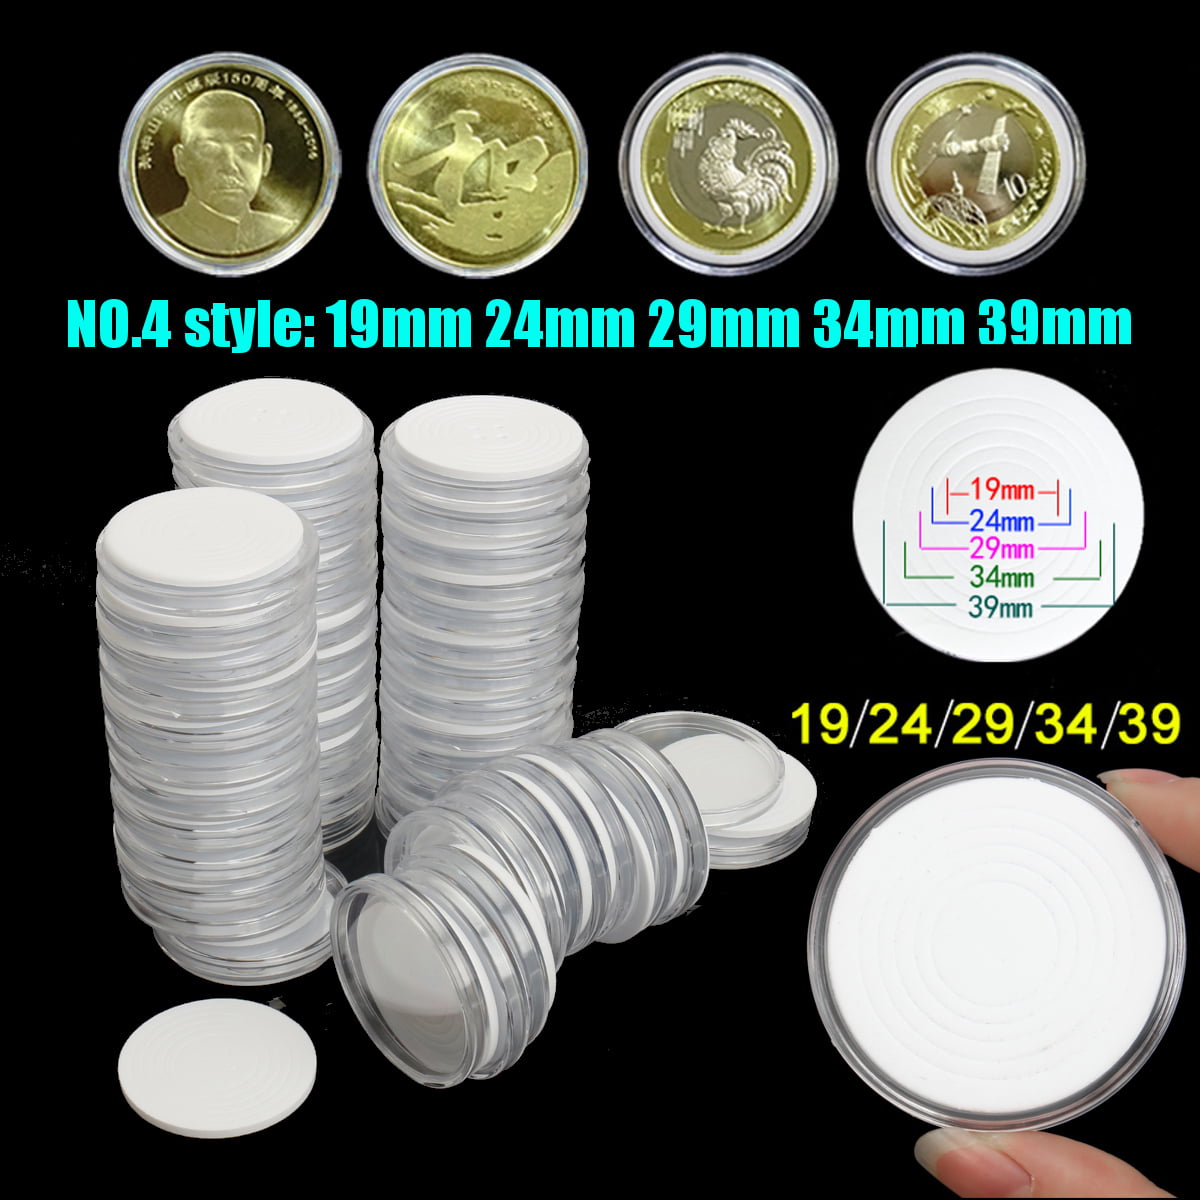 20pcs US Acrylic Capsules Coin Holders Case Adjustable for 19/ 24/ 29/ 34/ 39mm